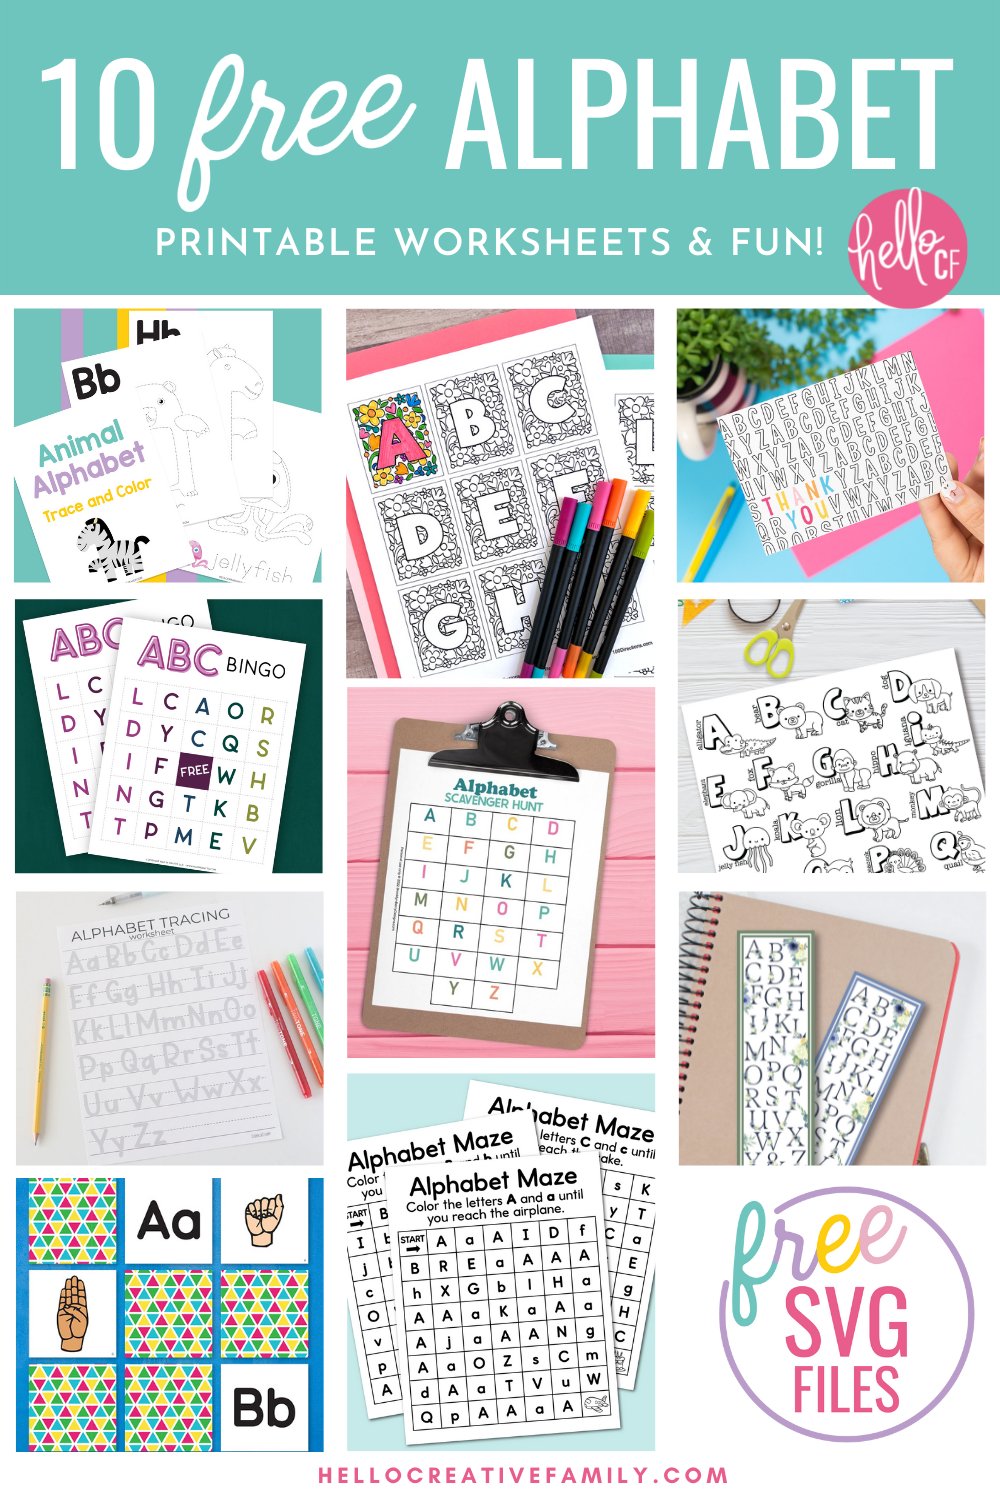 Grab your crayons and pencils! We're sharing 10 free alphabet printables including animal ABC tracing worksheets that kids can use to color and practice their letters! Perfect for preschool, elementary school, daycare and homeschooling! Other printables include alphabet bingo, alphabet scavenger hunt and alphabet coloring sheets!